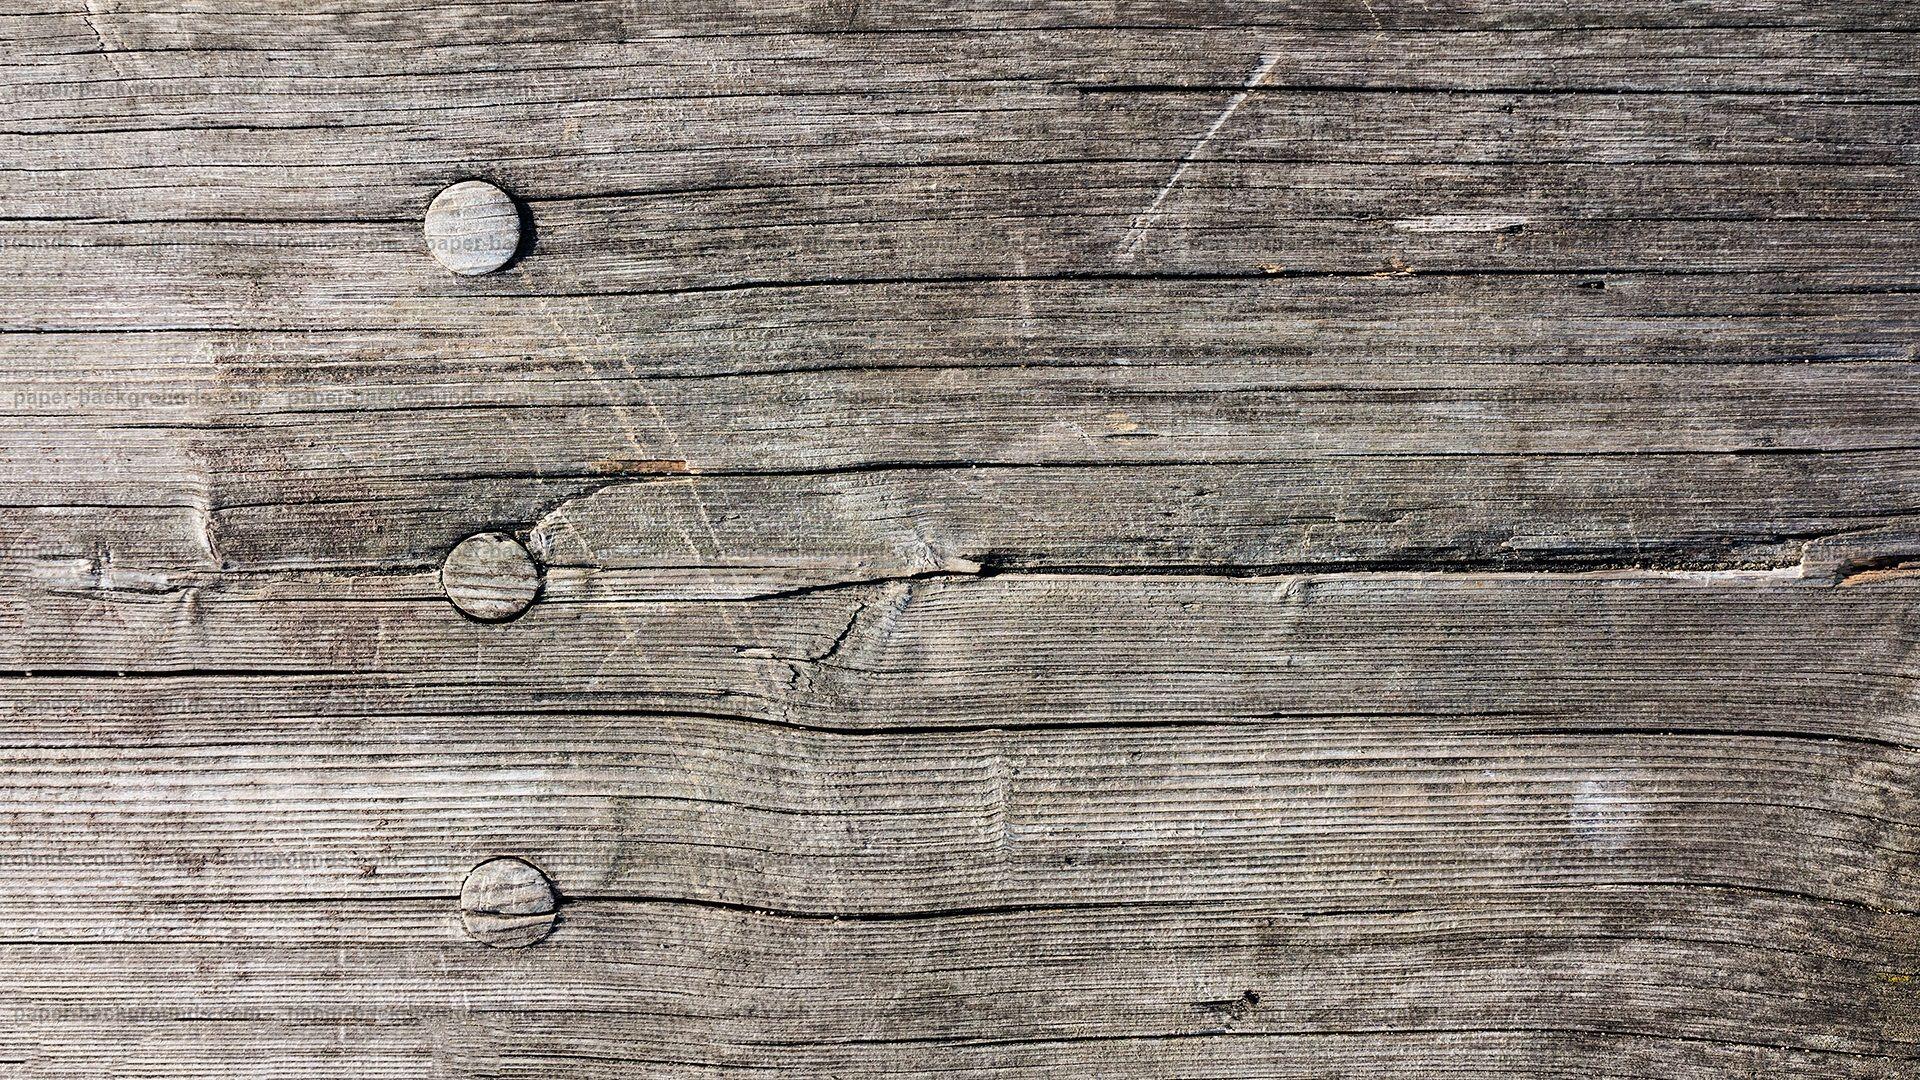 high resolution old wood background